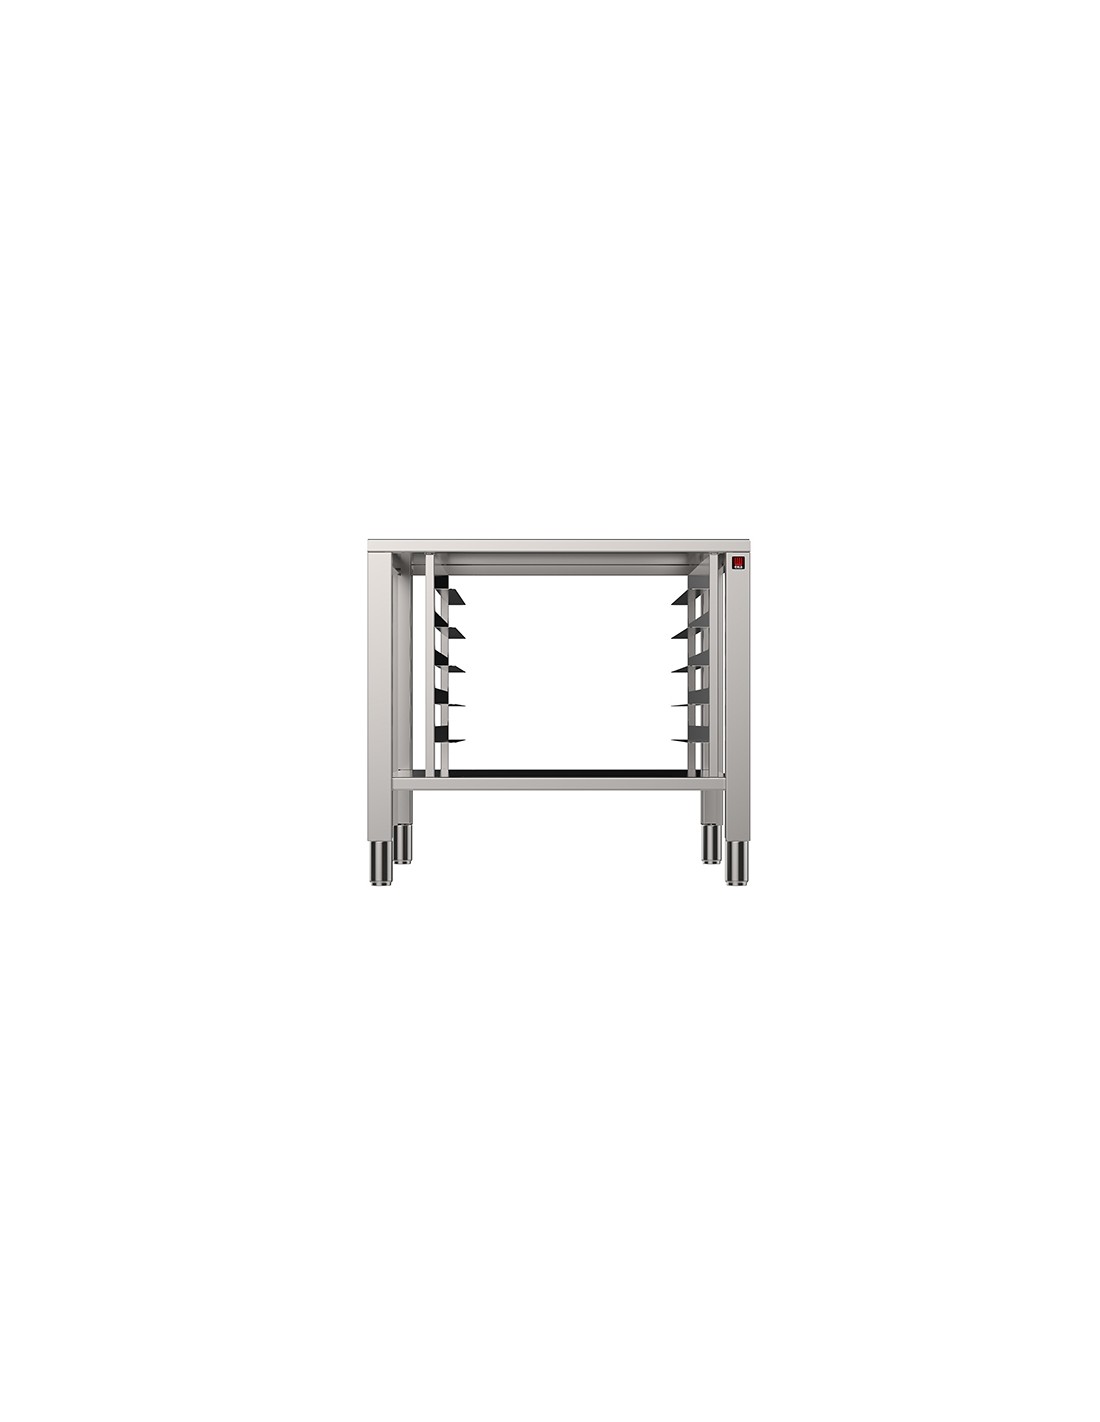 Fixed table - Acciaio inox AISI 430 - Furnace supports 4-6-10 pans - Size cm85x 78.7 x 77h